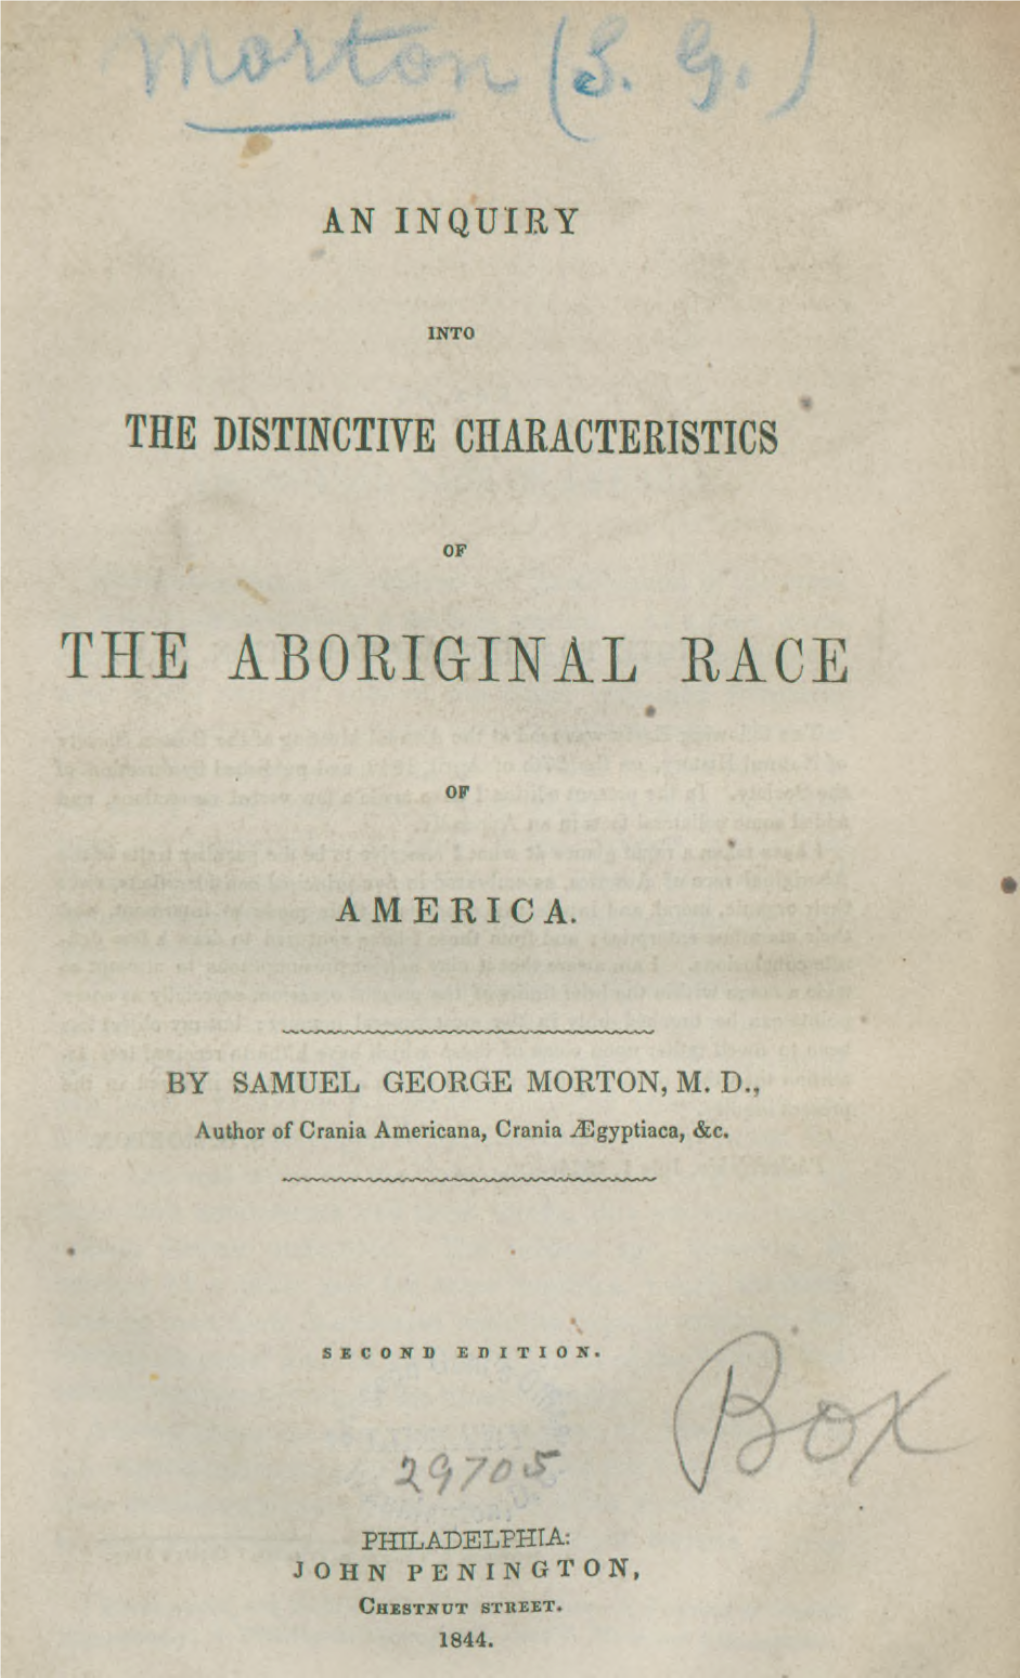 An Inquiry Into the Distinctive Characteristics of the Aboriginal